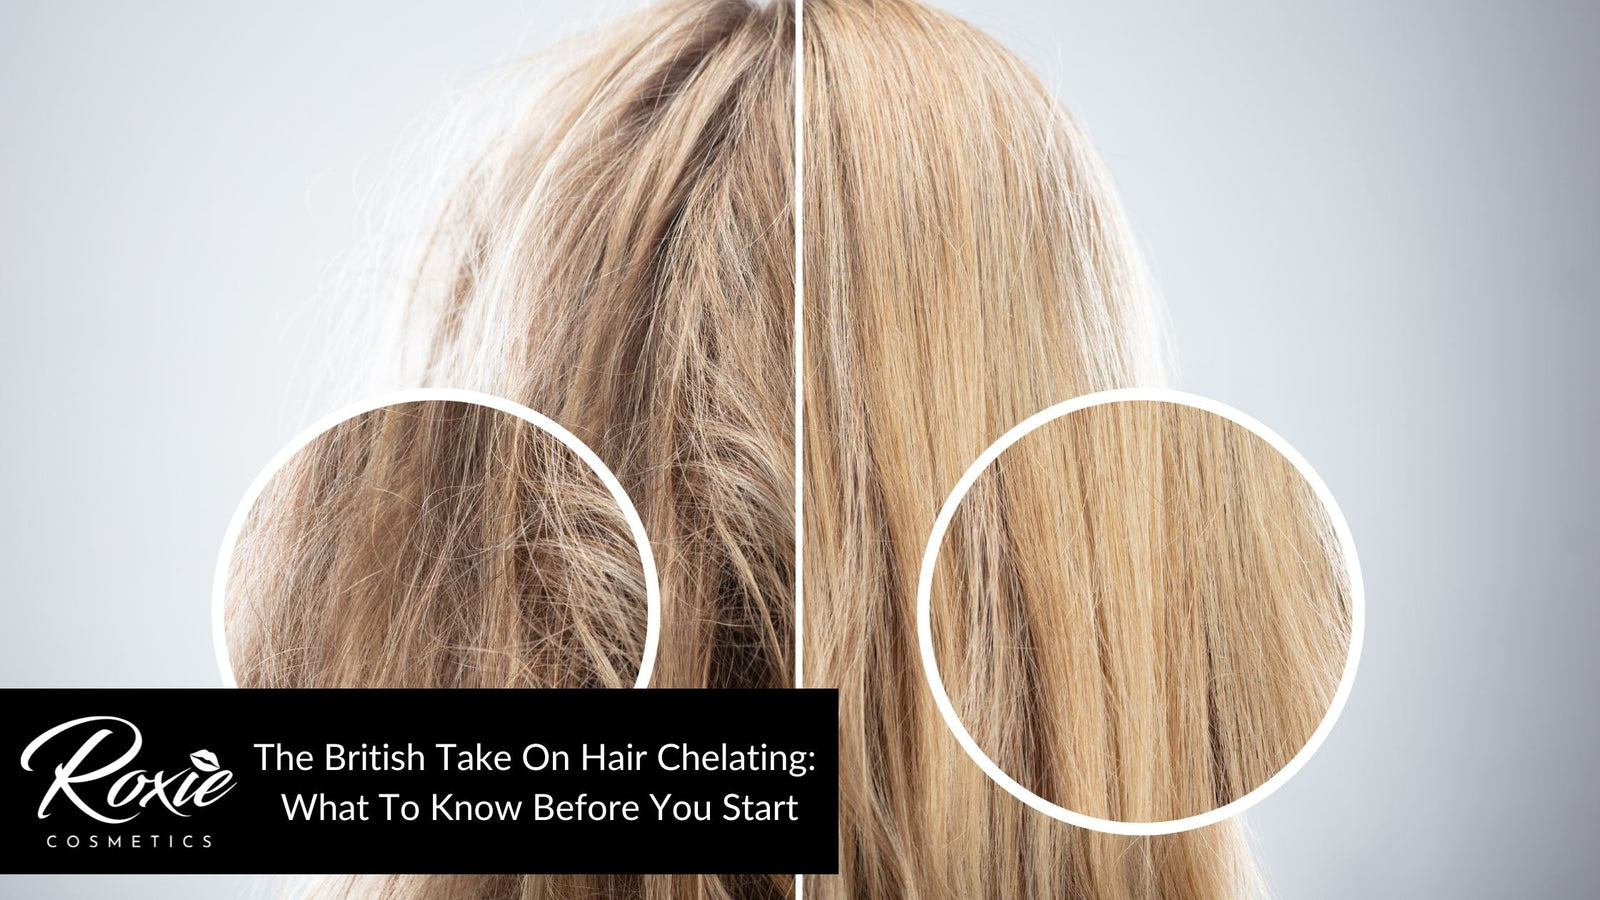 hair chelating - all you need to know